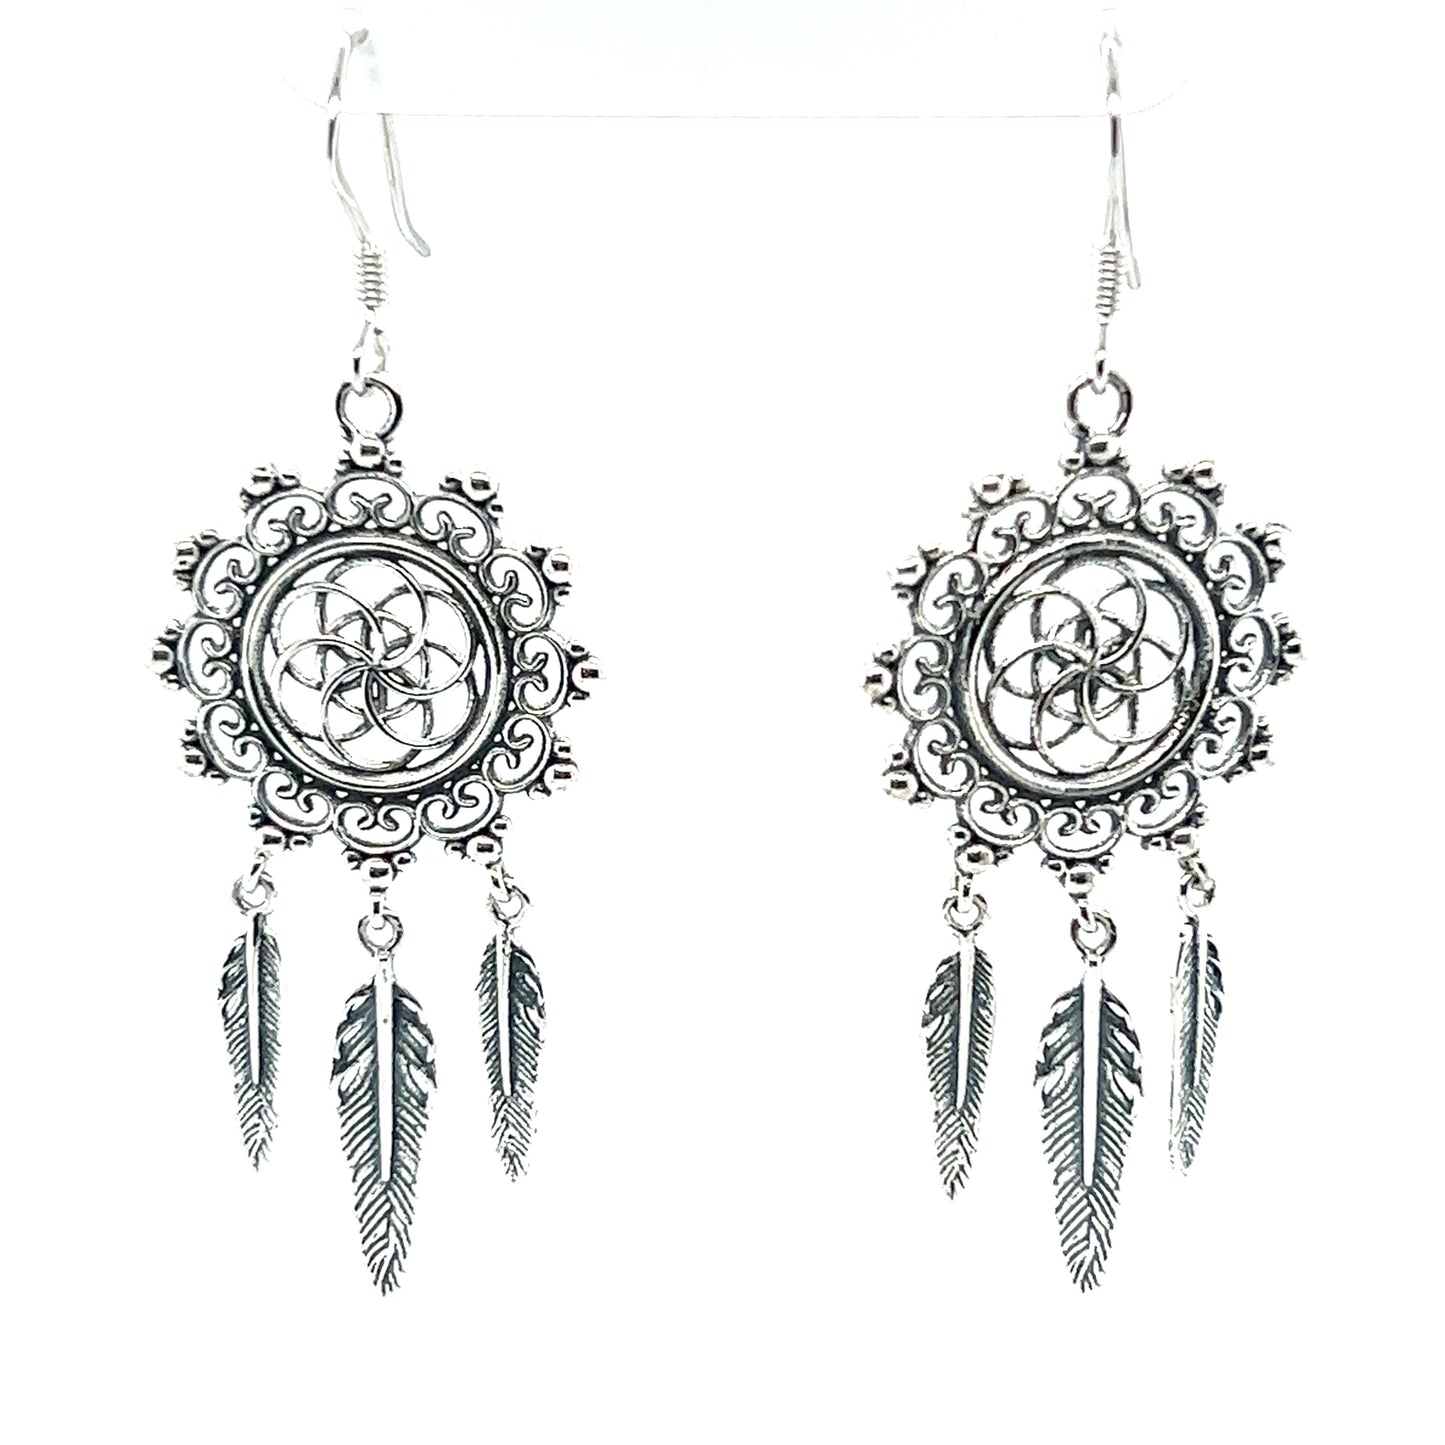 A pair of Super Silver Dreamcatcher Earrings With The Flower Of Life Symbol, perfect for the bohemian souls who appreciate sacred geometry.